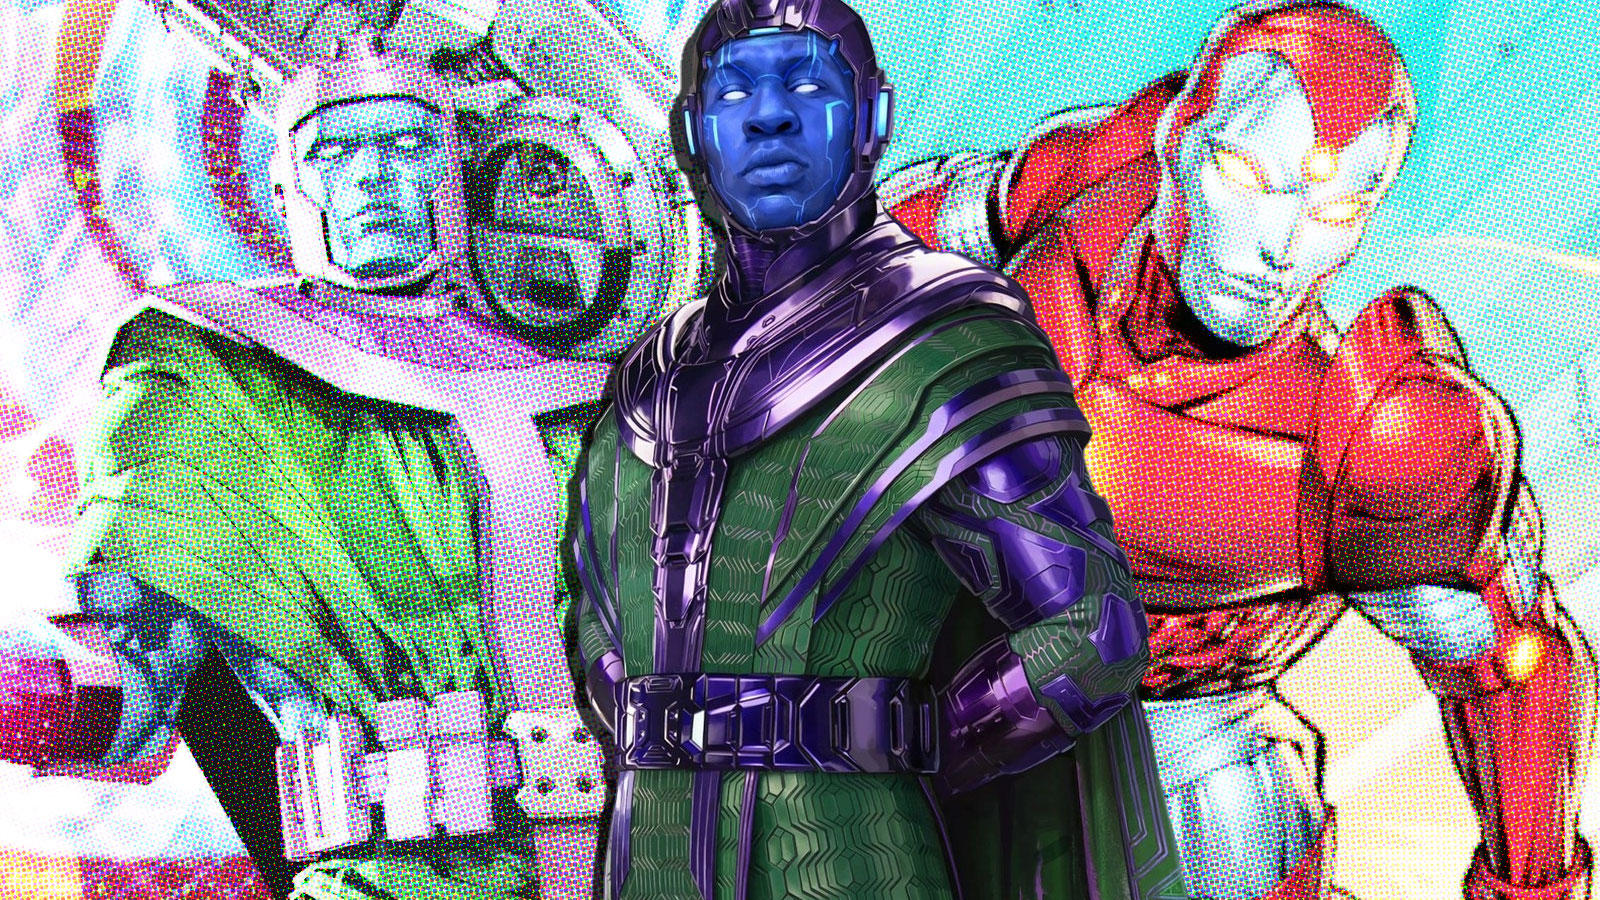 Multiple versions of Kang the Conqueror.